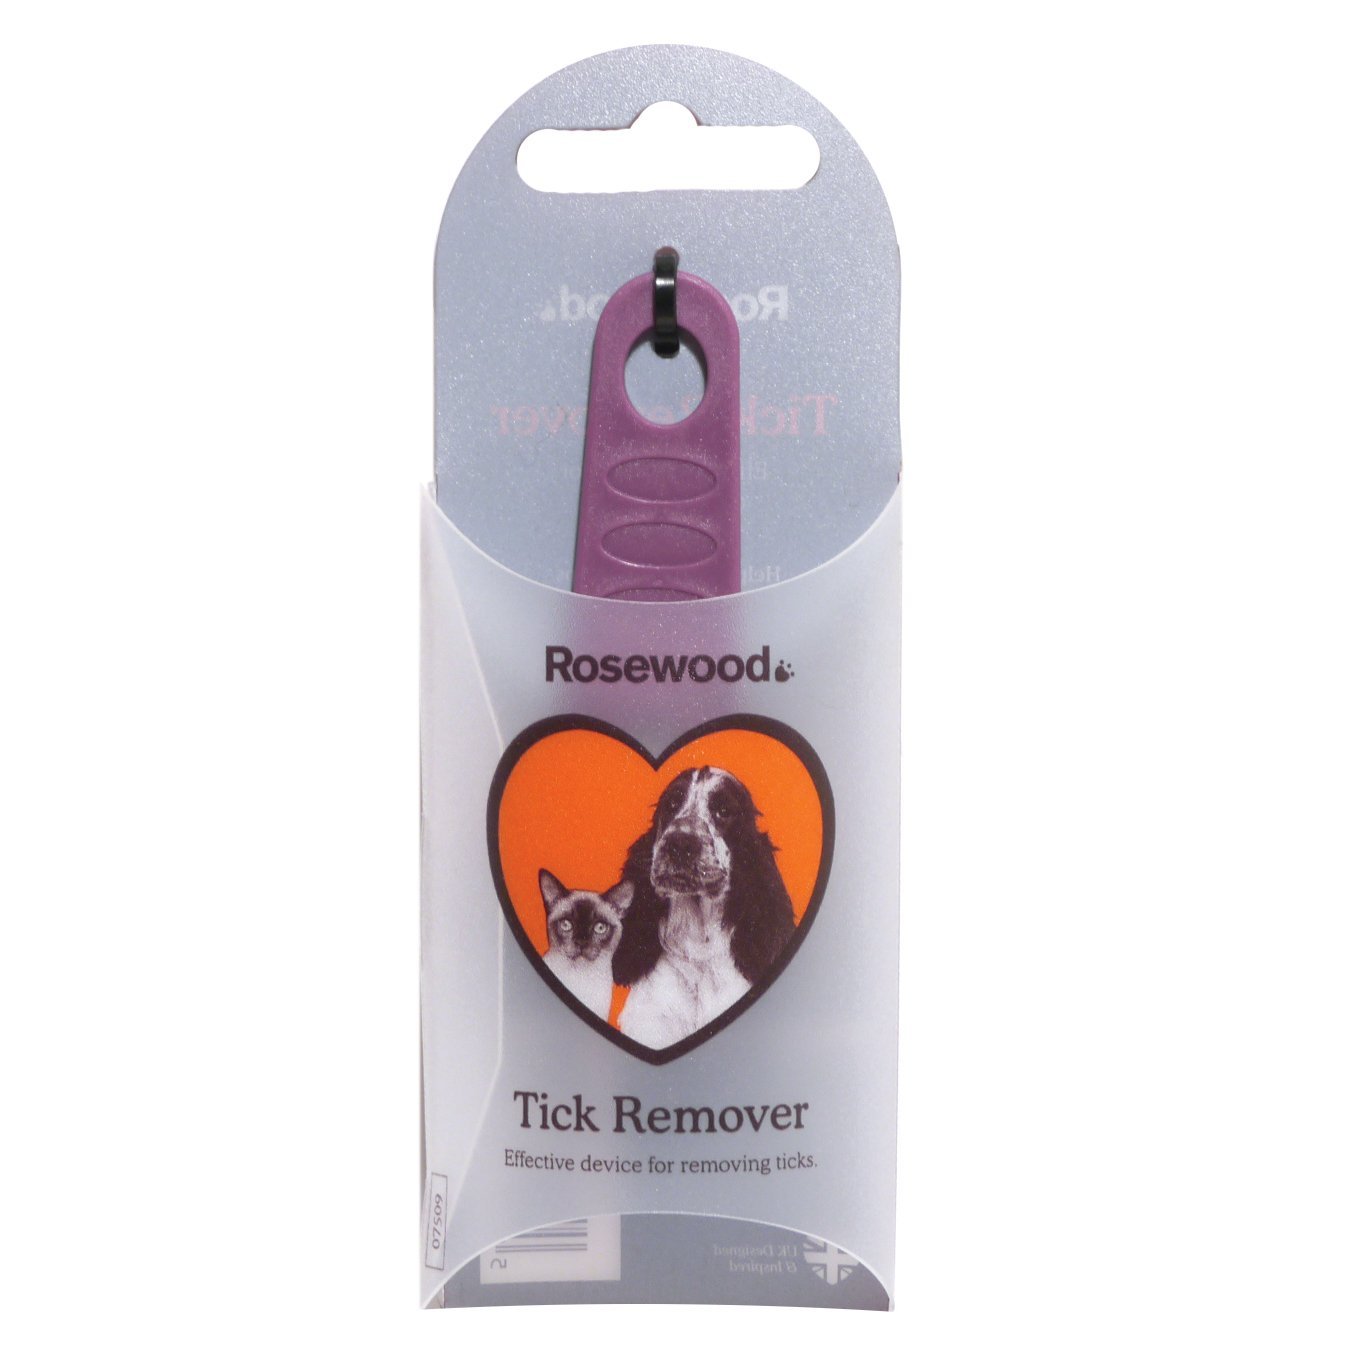 Rosewood Salon Grooming Tick Remover - Tick and Flea Control